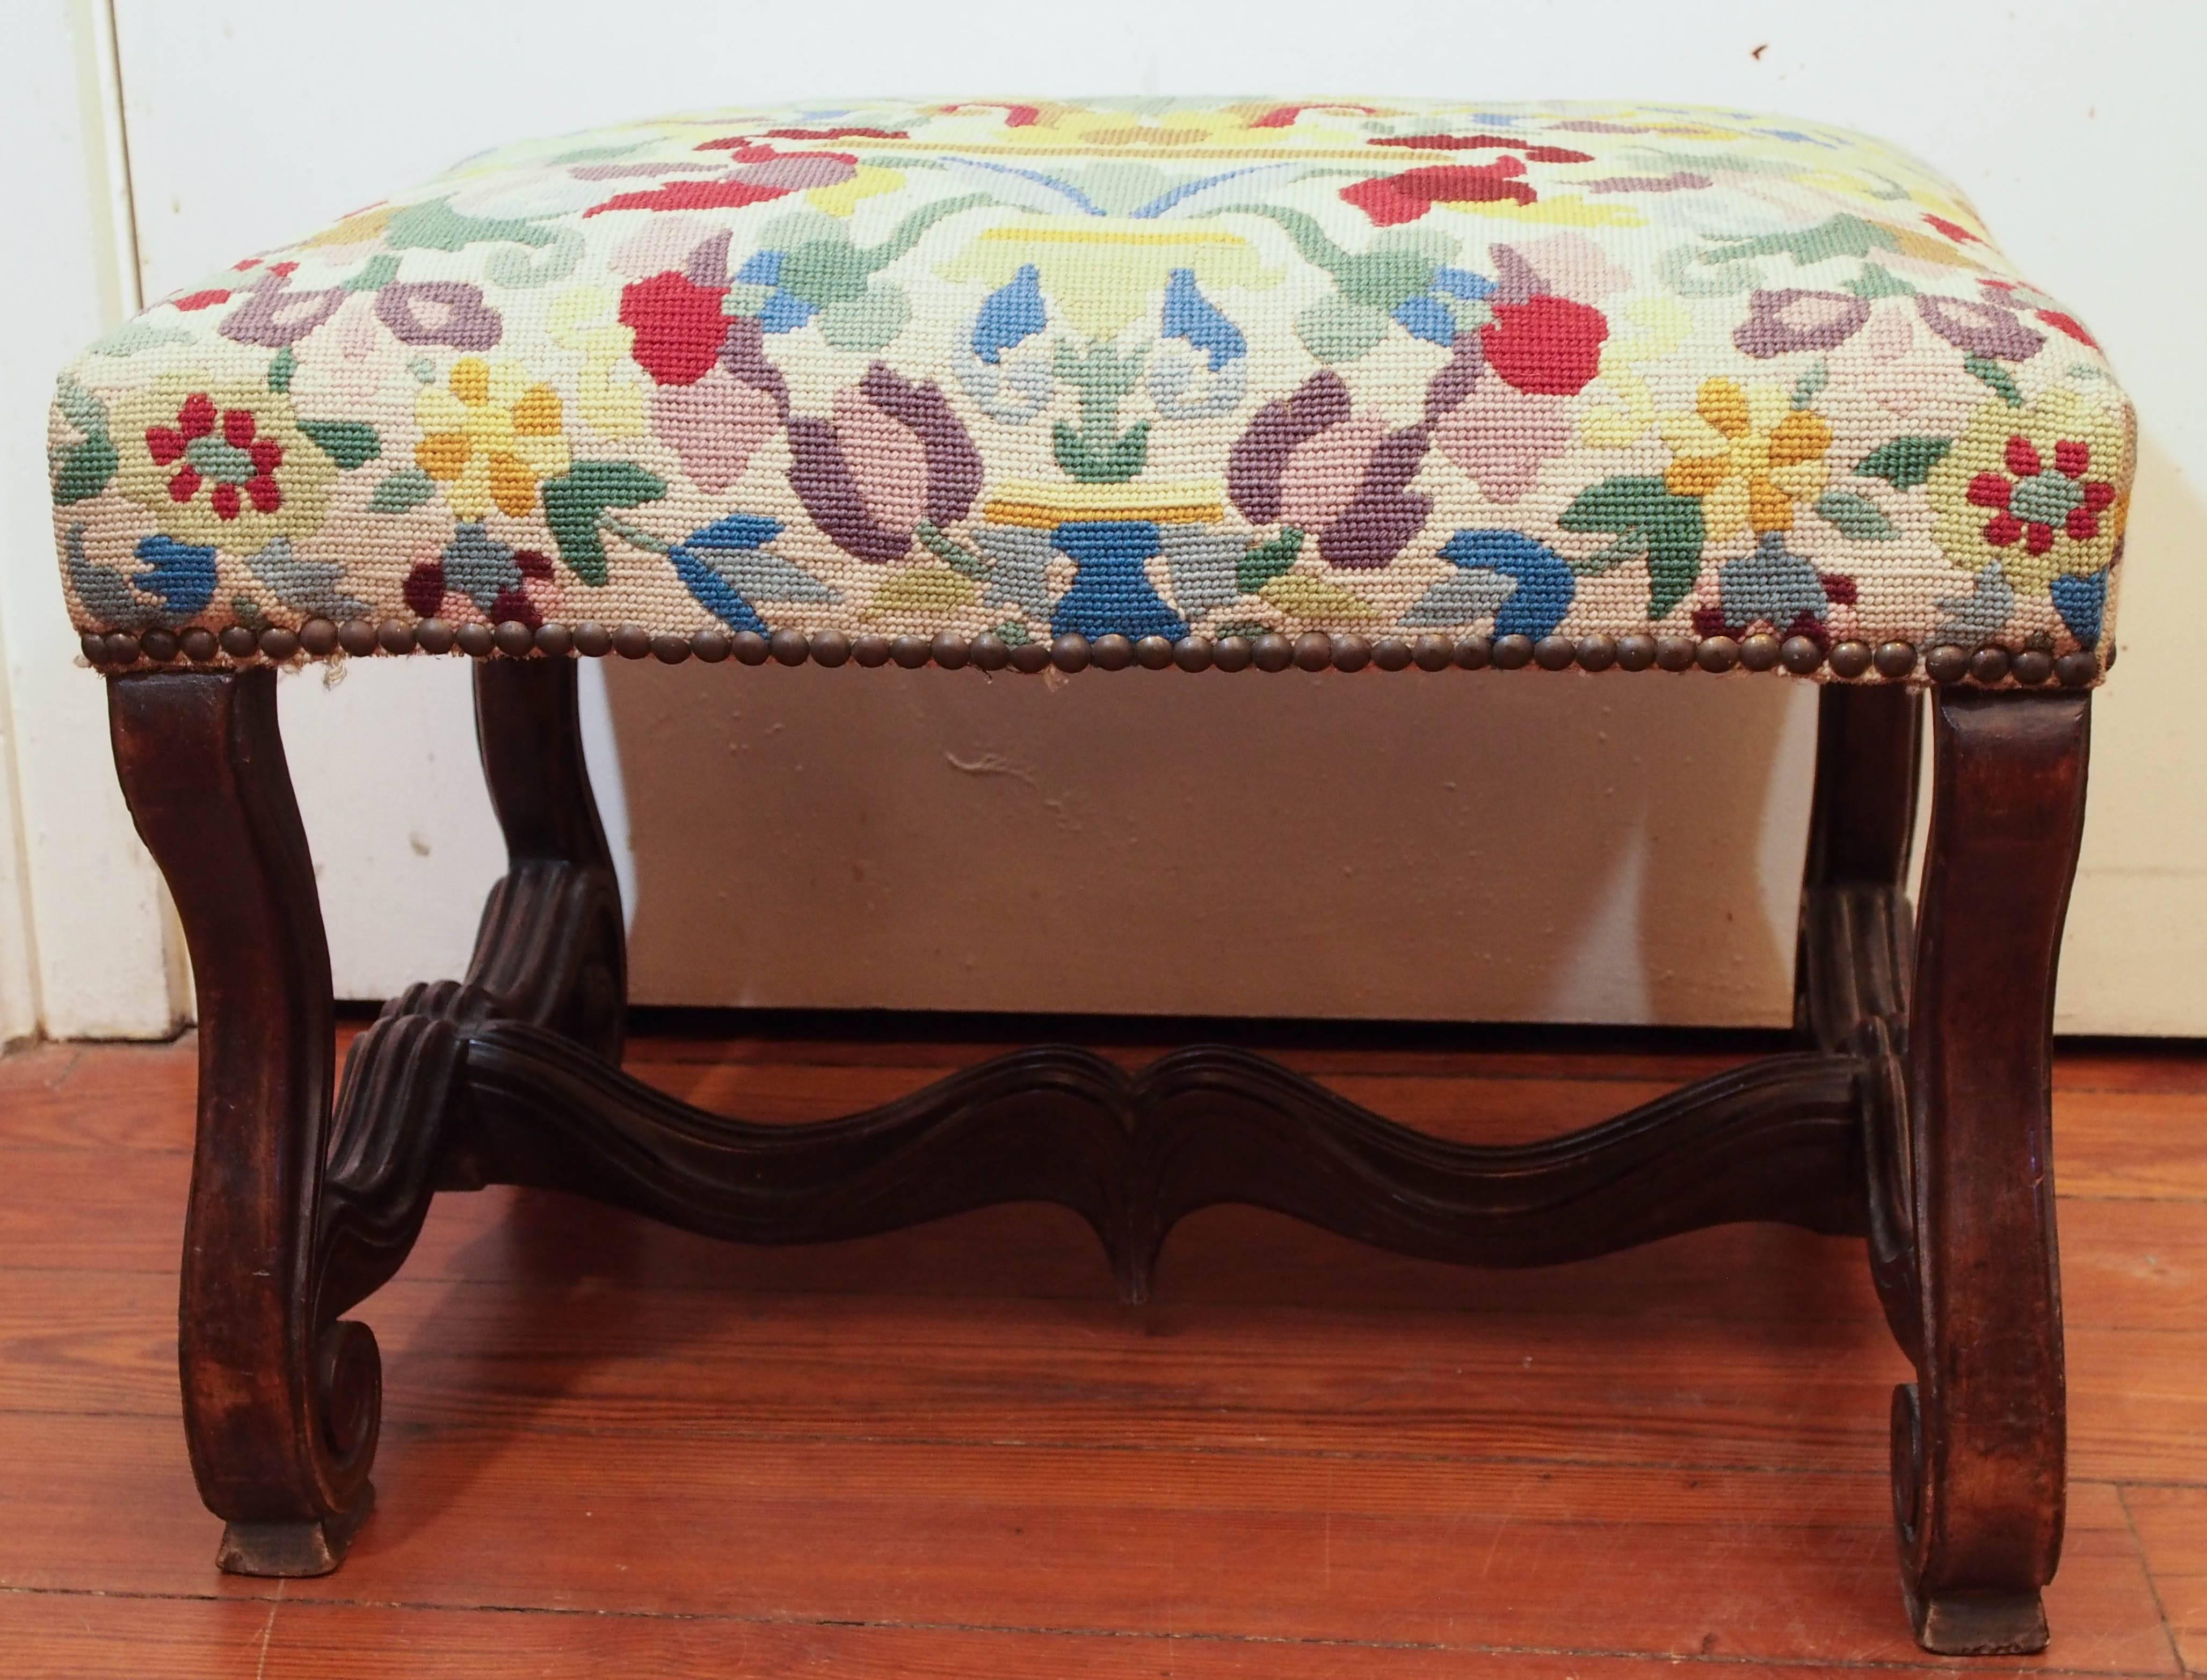 French walnut Os De Mouton (lambs bone) stool with needlepoint cover.